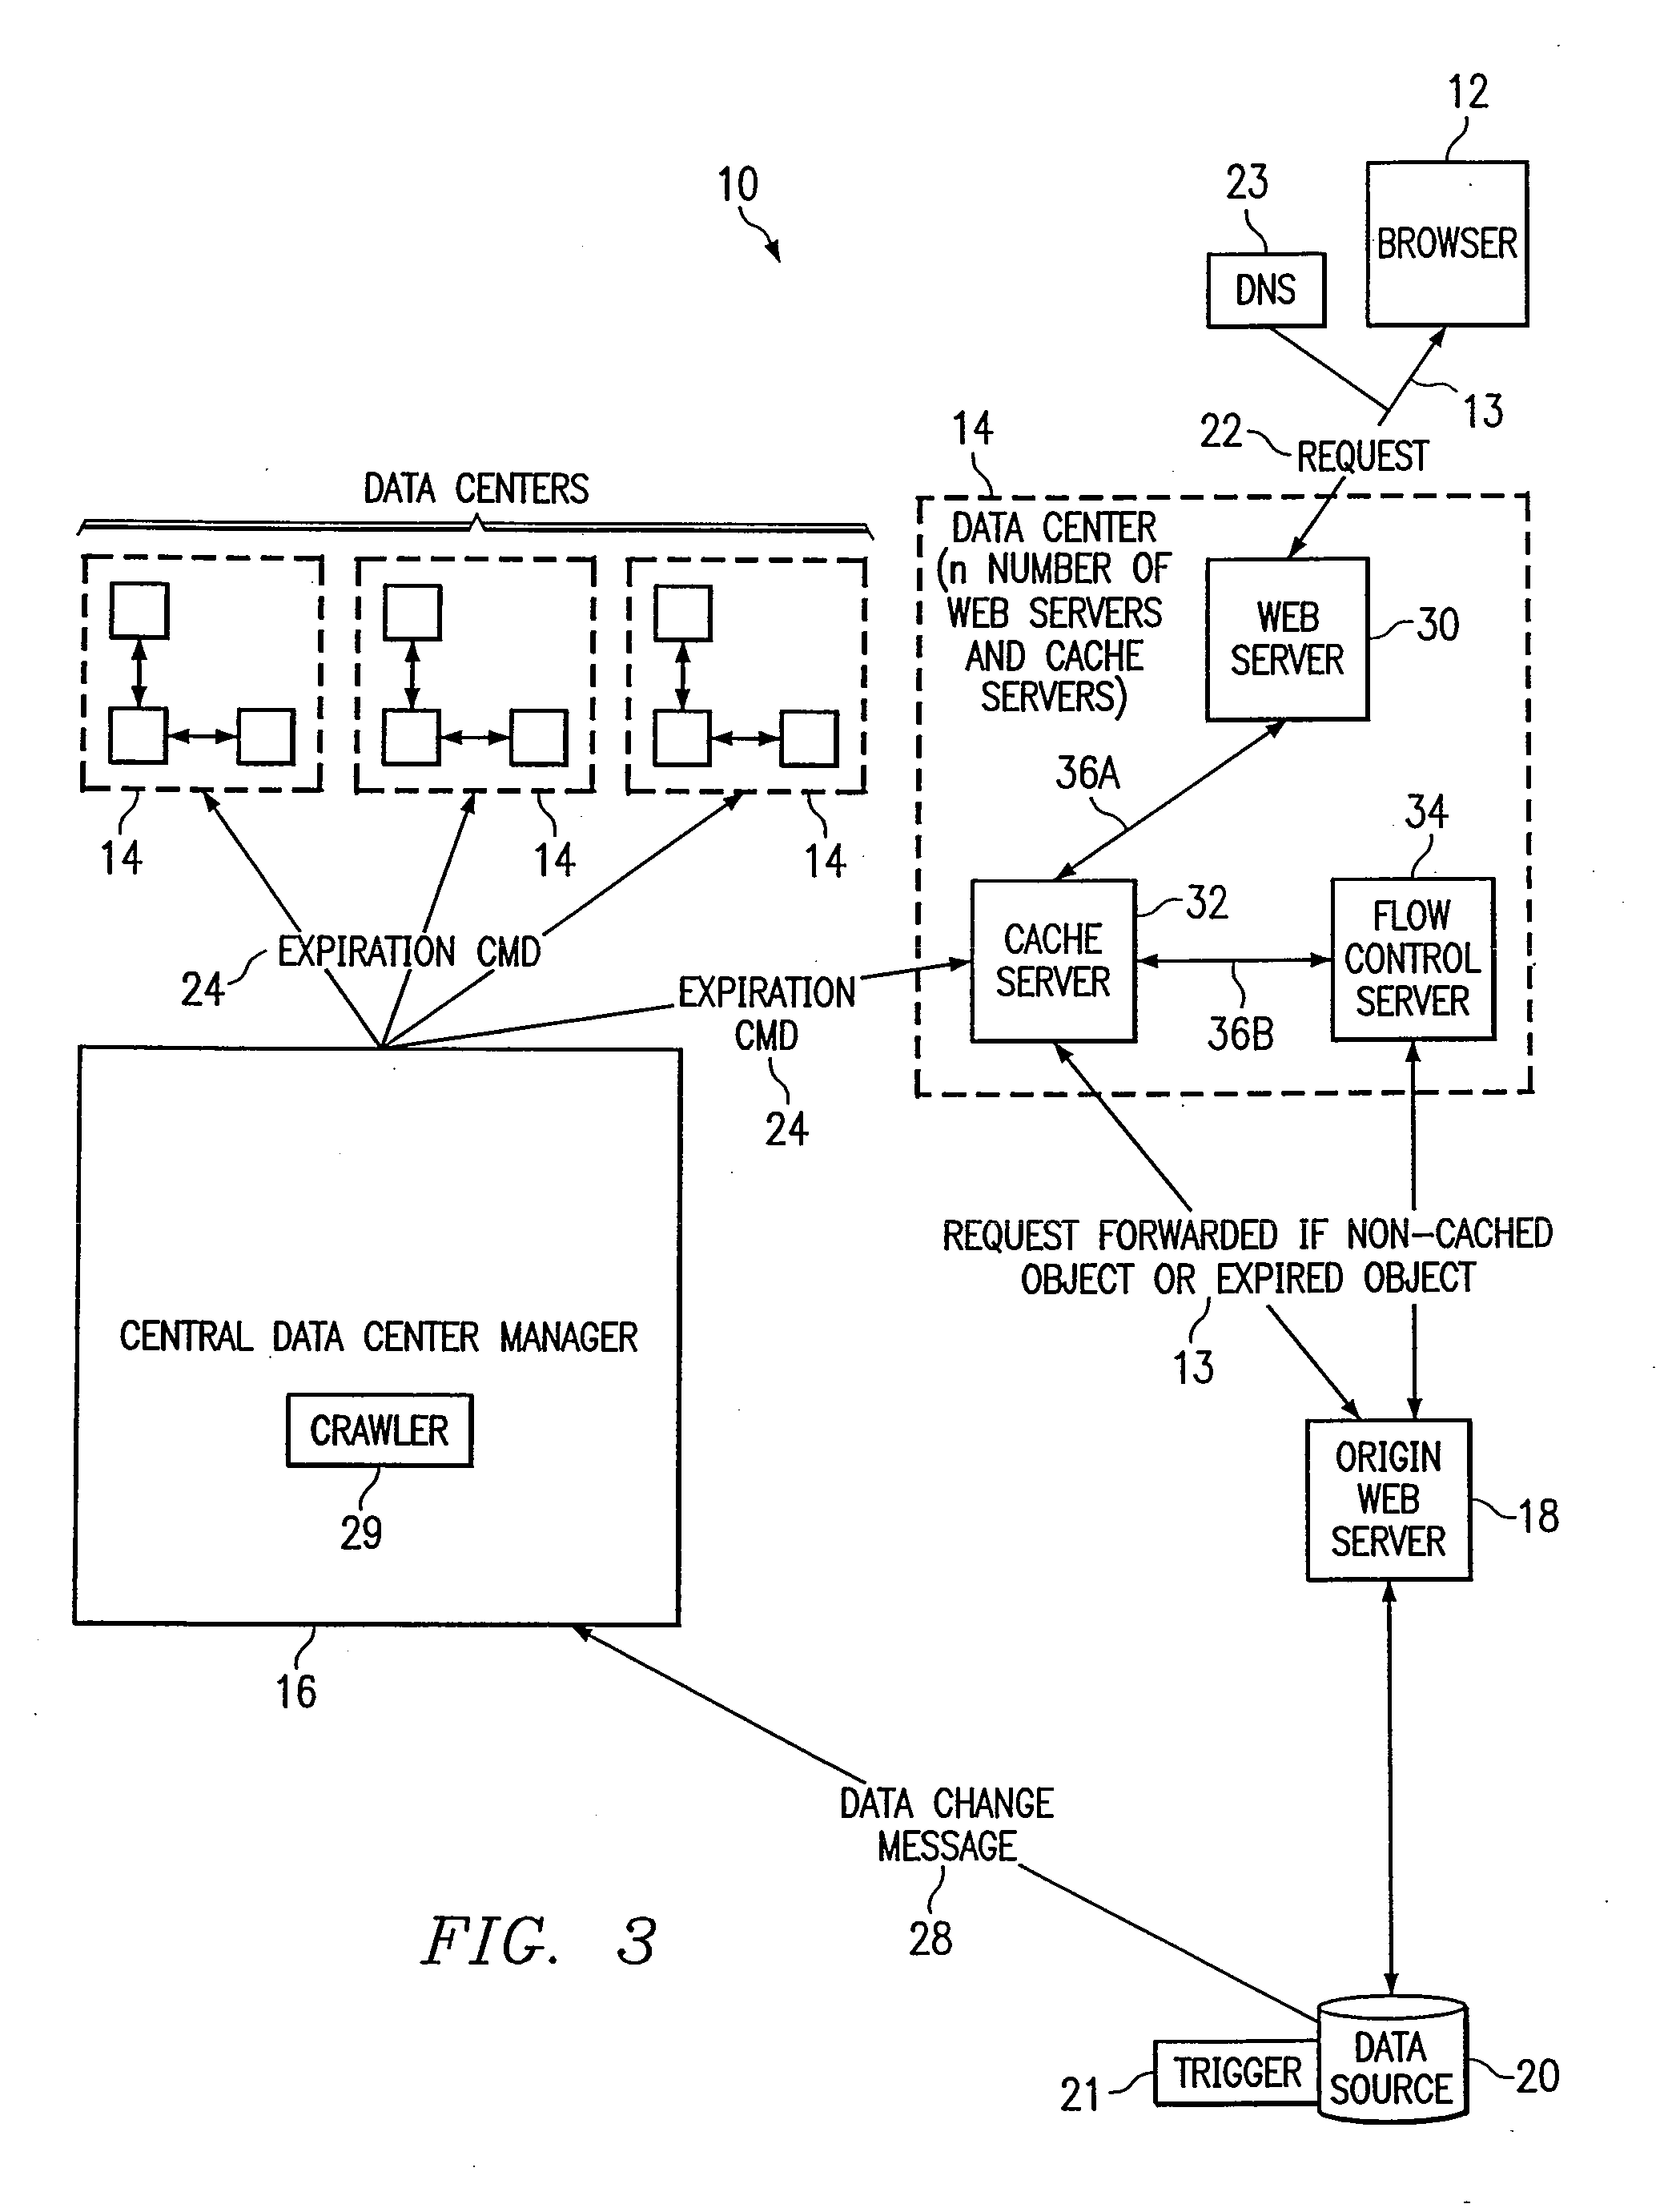 Method and Apparatus for Dynamic Data Flow Control Using Prioritization of Data Requests